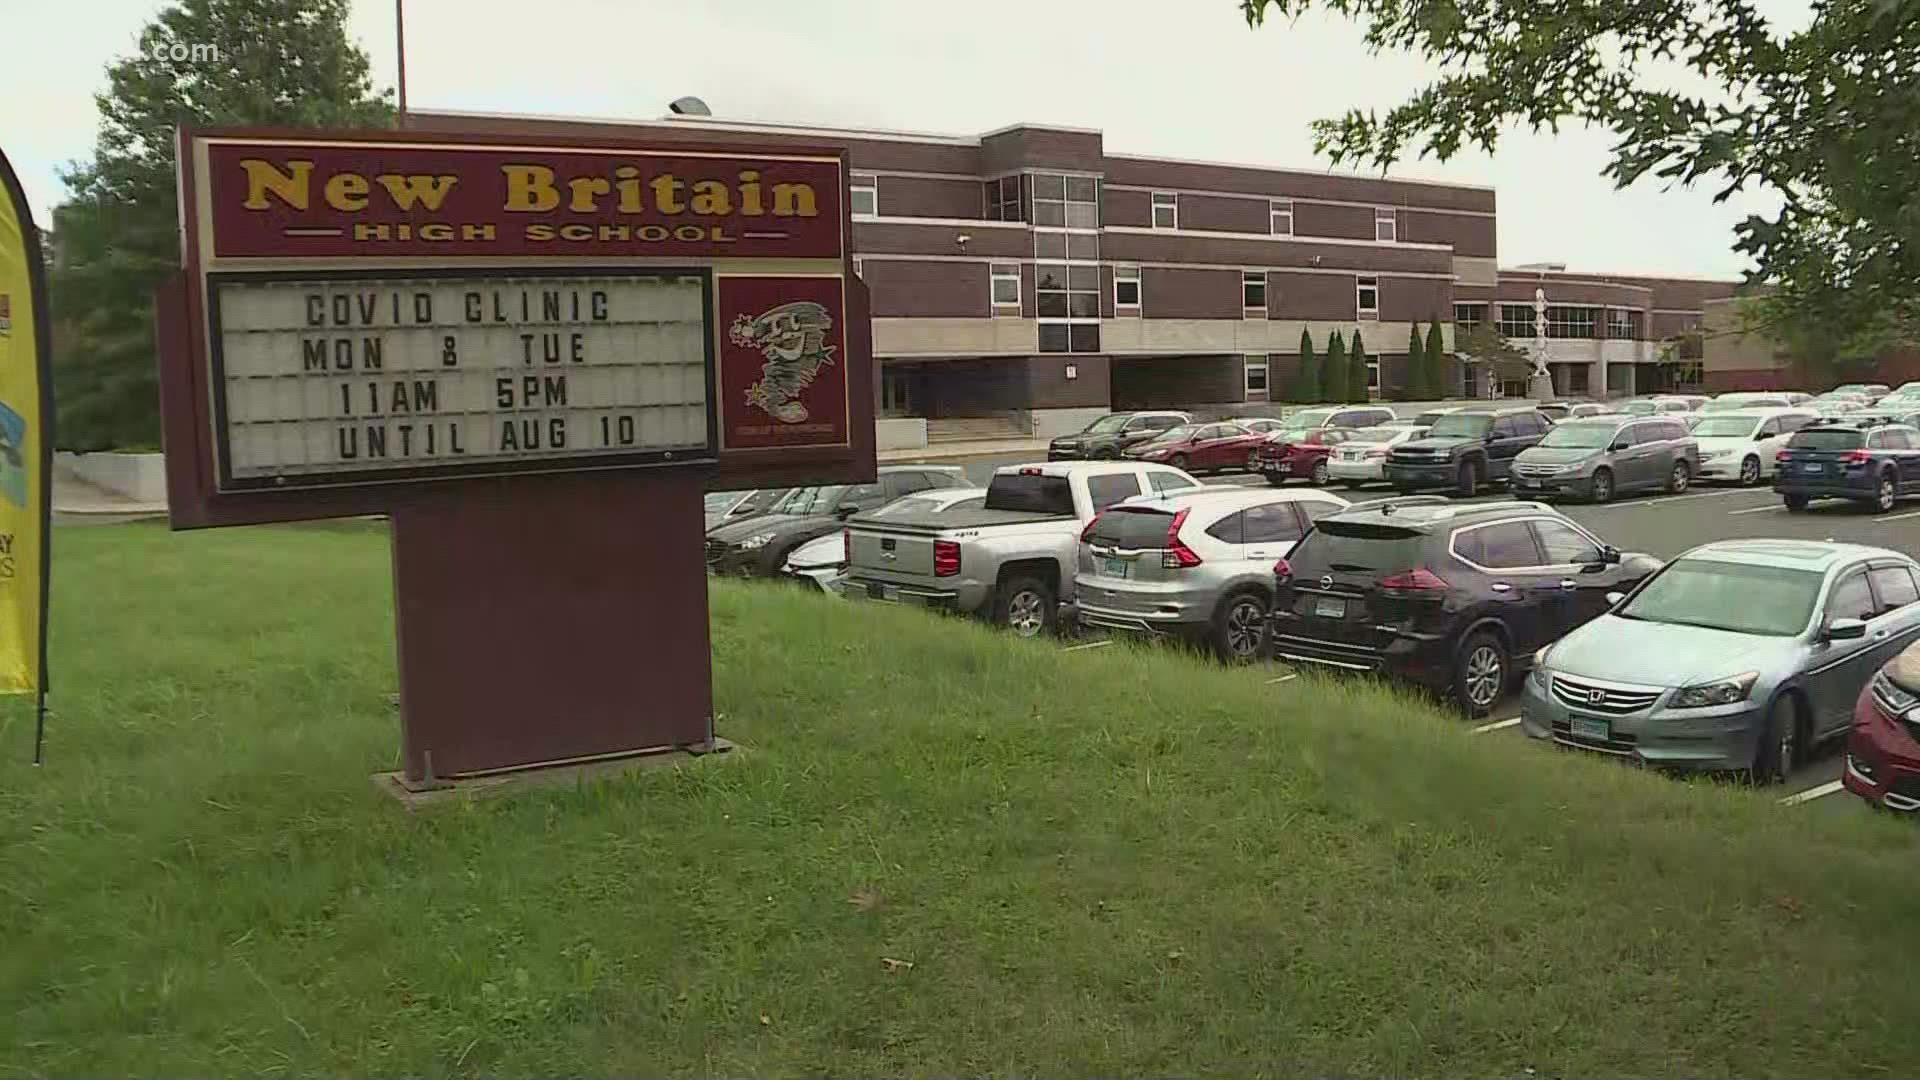 "For them to have to stay home because of that makes us wonder how severe was it and what really led to that decision," a junior class parent told FOX61.